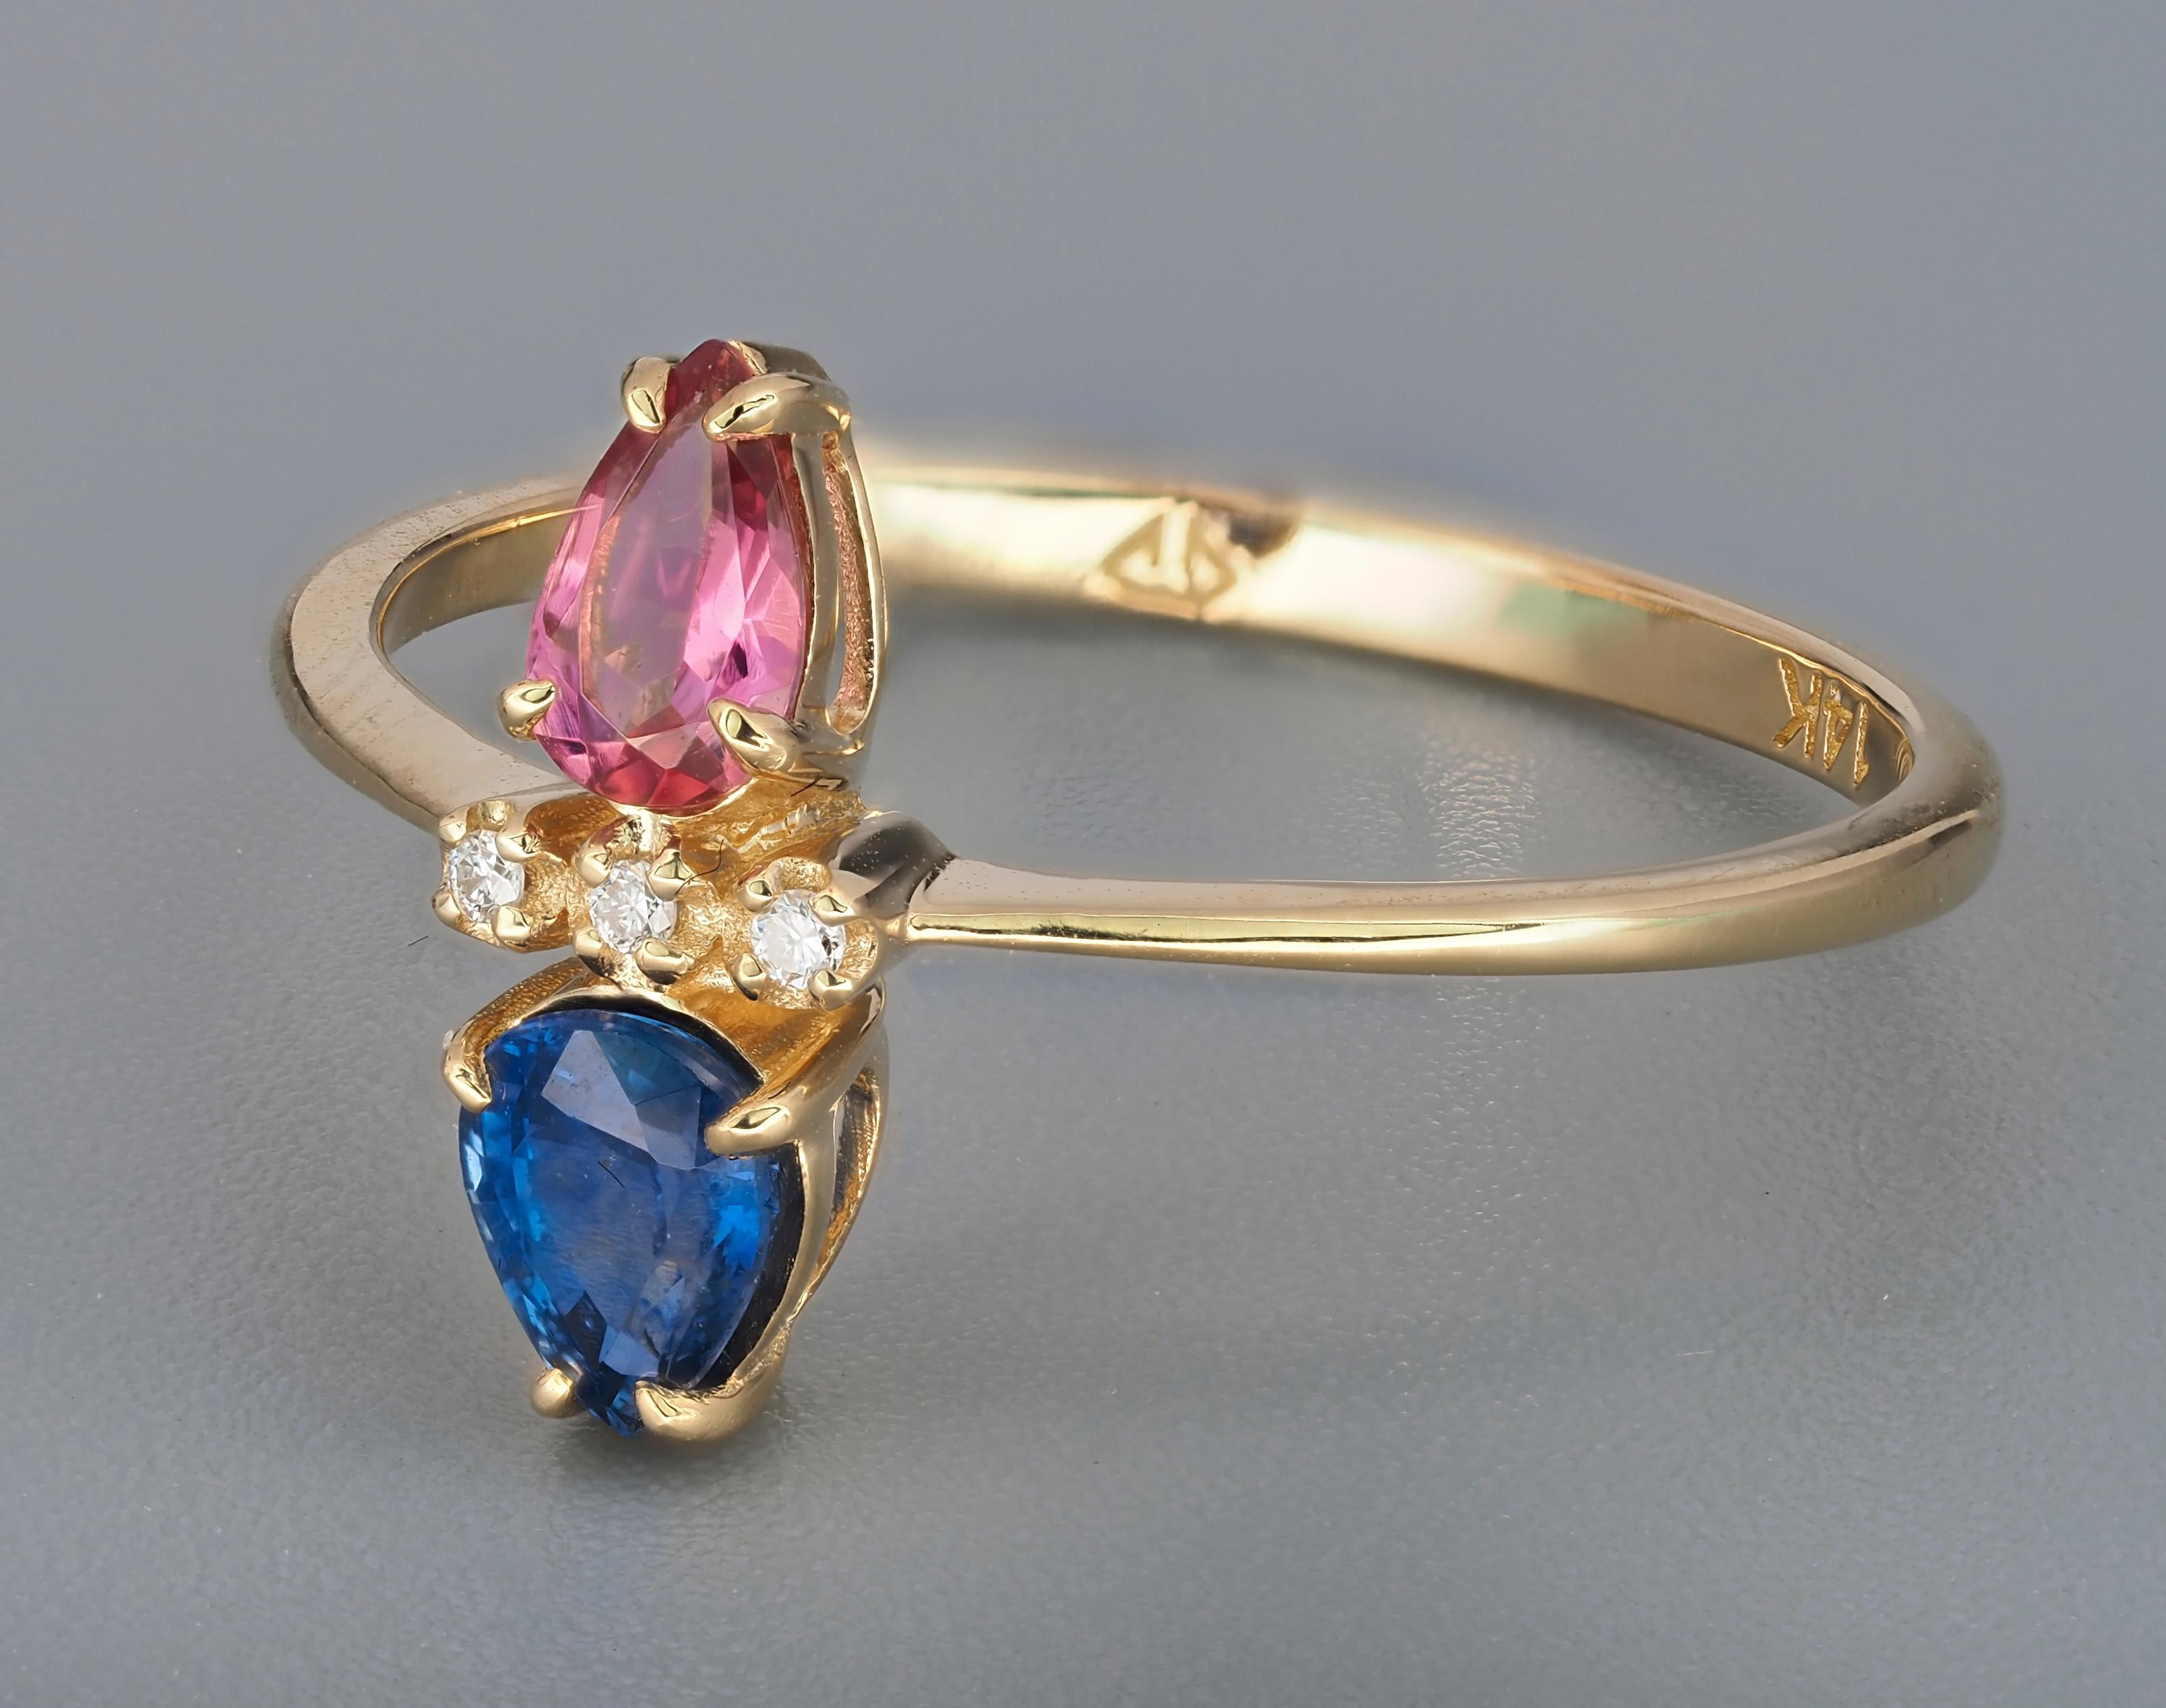 For Sale:  14k Gold Ring in Art Deco Style with Central Sapphire, Tourmaline and Diamonds 4